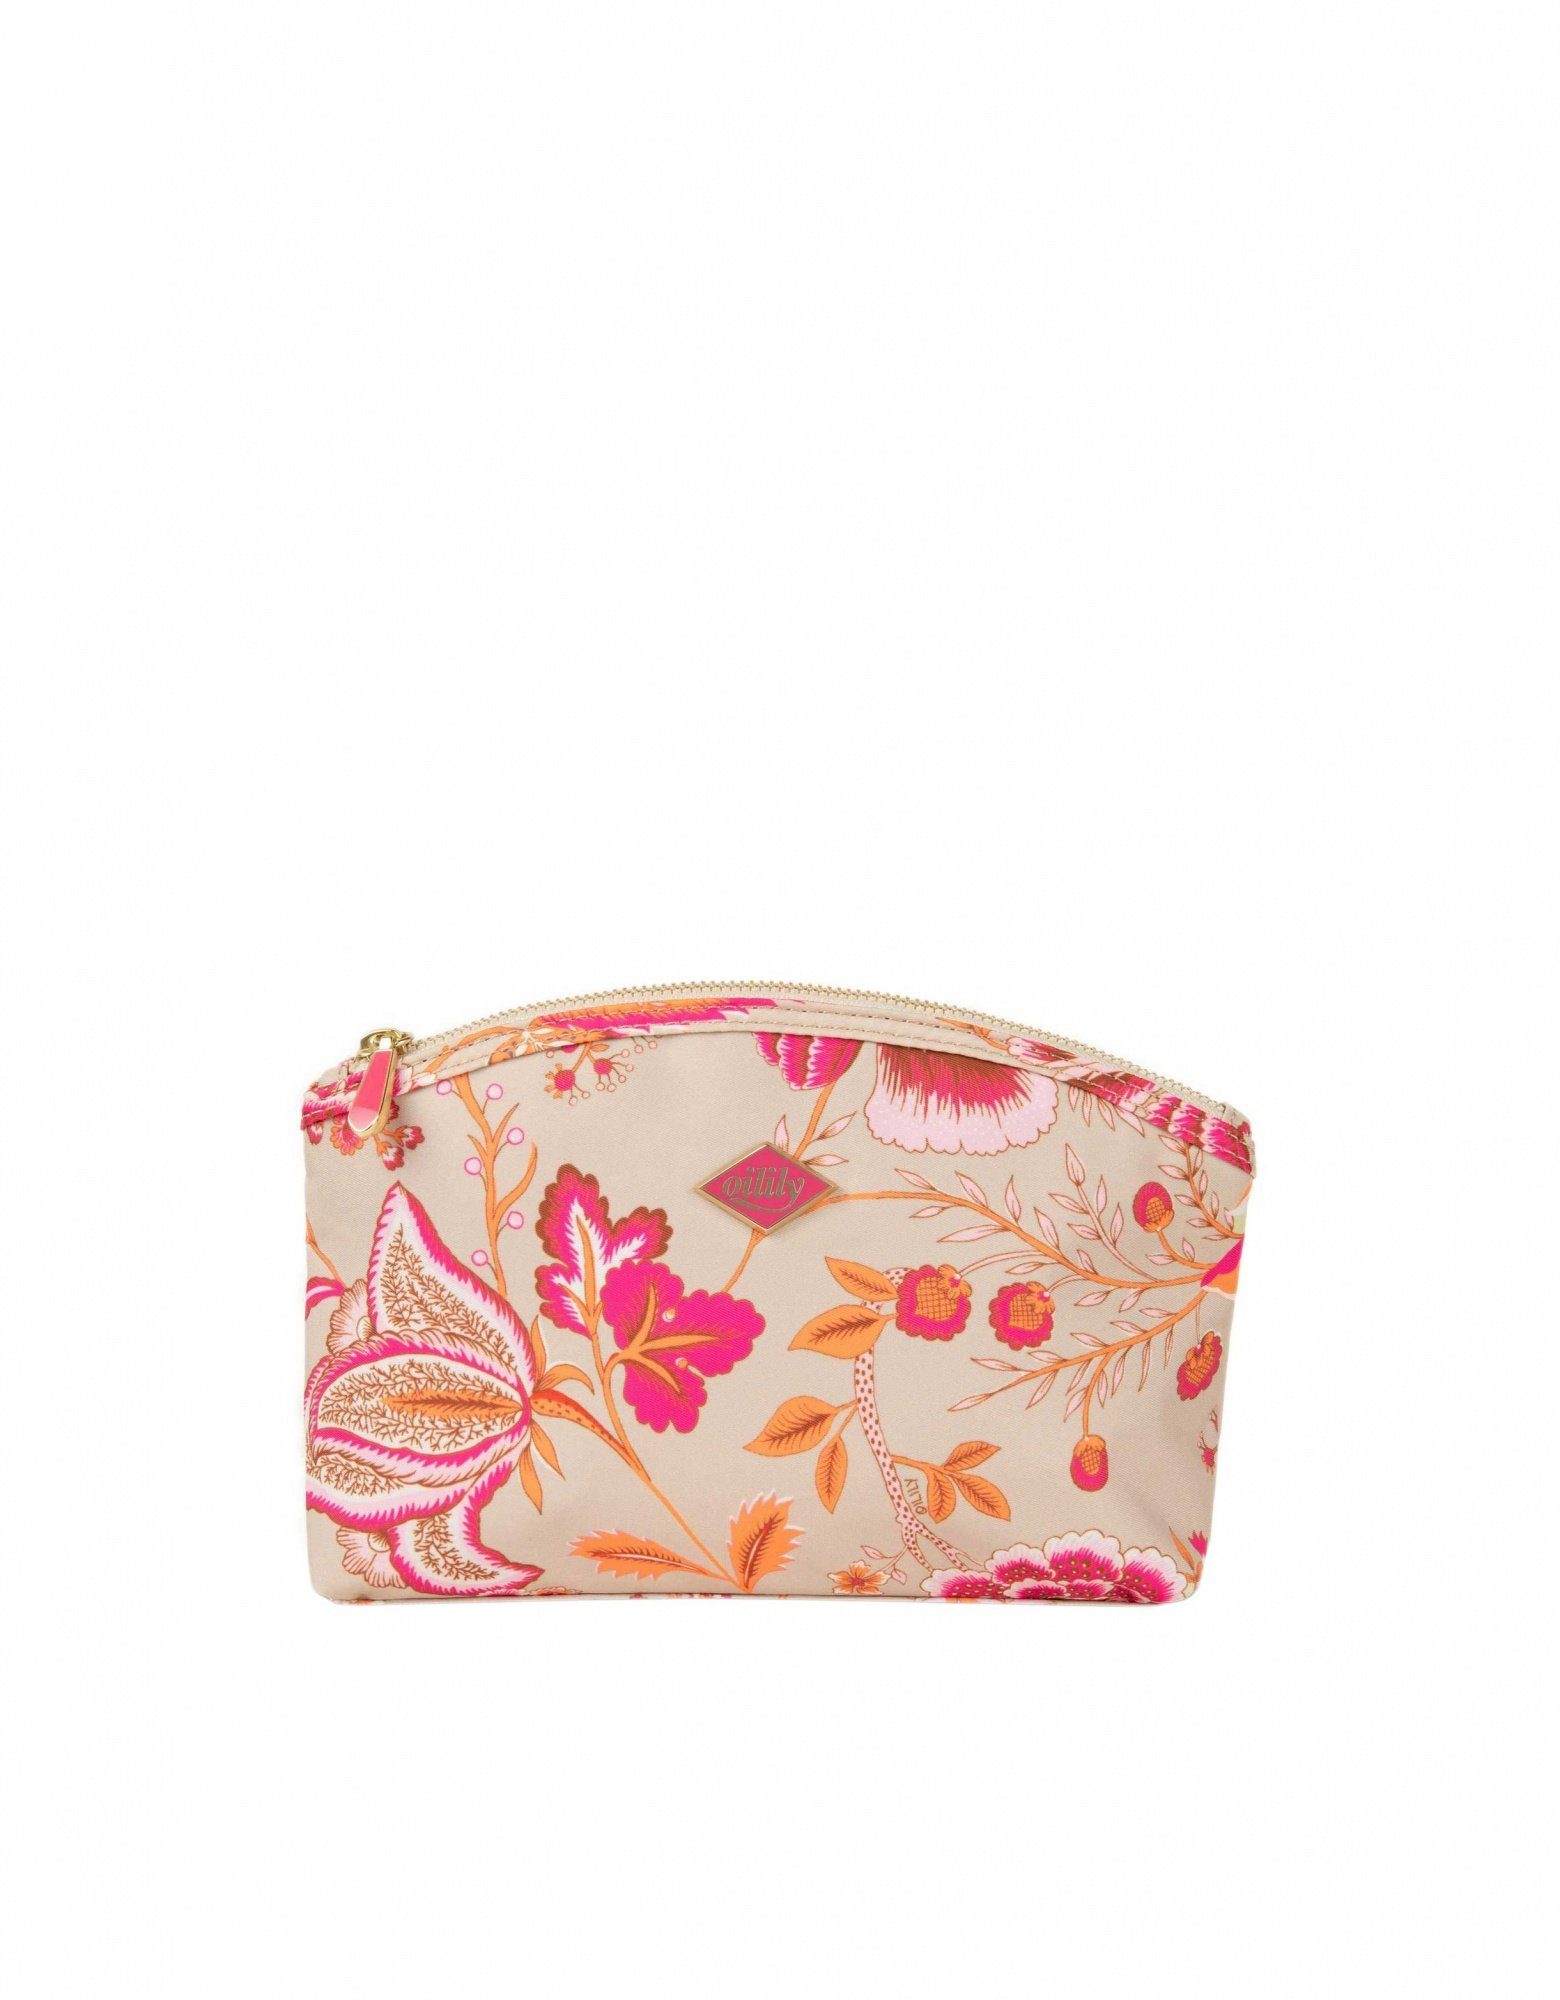 Icon Bag Cosmetic Casey Pink Sits Kosmetiktasche Oilily